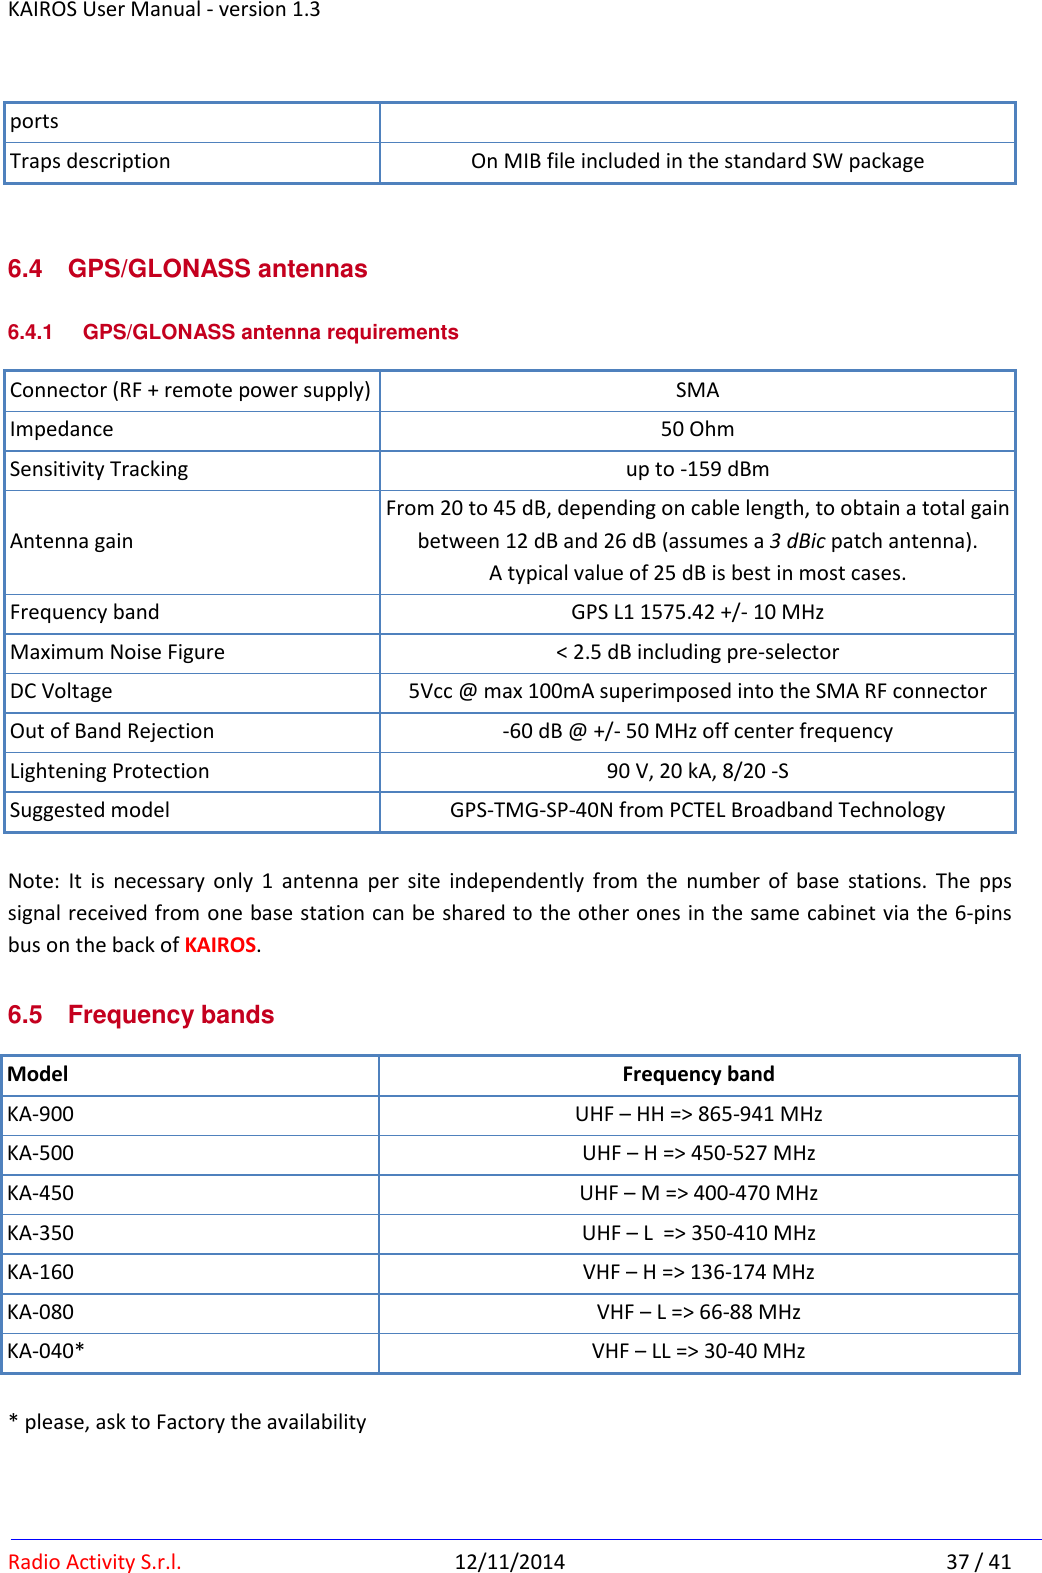 KAIROS User Manual - version 1.3   Radio Activity S.r.l.  12/11/2014  37 / 41 ports Traps description On MIB file included in the standard SW package  6.4  GPS/GLONASS antennas 6.4.1  GPS/GLONASS antenna requirements Connector (RF + remote power supply) SMA Impedance 50 Ohm Sensitivity Tracking up to -159 dBm Antenna gain From 20 to 45 dB, depending on cable length, to obtain a total gain between 12 dB and 26 dB (assumes a 3 dBic patch antenna). A typical value of 25 dB is best in most cases. Frequency band GPS L1 1575.42 +/- 10 MHz Maximum Noise Figure &lt; 2.5 dB including pre-selector DC Voltage 5Vcc @ max 100mA superimposed into the SMA RF connector Out of Band Rejection -60 dB @ +/- 50 MHz off center frequency Lightening Protection 90 V, 20 kA, 8/20 -S Suggested model GPS-TMG-SP-40N from PCTEL Broadband Technology  Note:  It  is  necessary  only  1  antenna  per  site  independently  from  the  number  of  base  stations.  The  pps signal received from one base station can be shared to the other ones in the same cabinet via the 6-pins bus on the back of KAIROS. 6.5  Frequency bands Model Frequency band KA-900  UHF – HH =&gt; 865-941 MHz KA-500  UHF – H =&gt; 450-527 MHz KA-450  UHF – M =&gt; 400-470 MHz KA-350 UHF – L  =&gt; 350-410 MHz KA-160 VHF – H =&gt; 136-174 MHz KA-080 VHF – L =&gt; 66-88 MHz KA-040* VHF – LL =&gt; 30-40 MHz  * please, ask to Factory the availability    